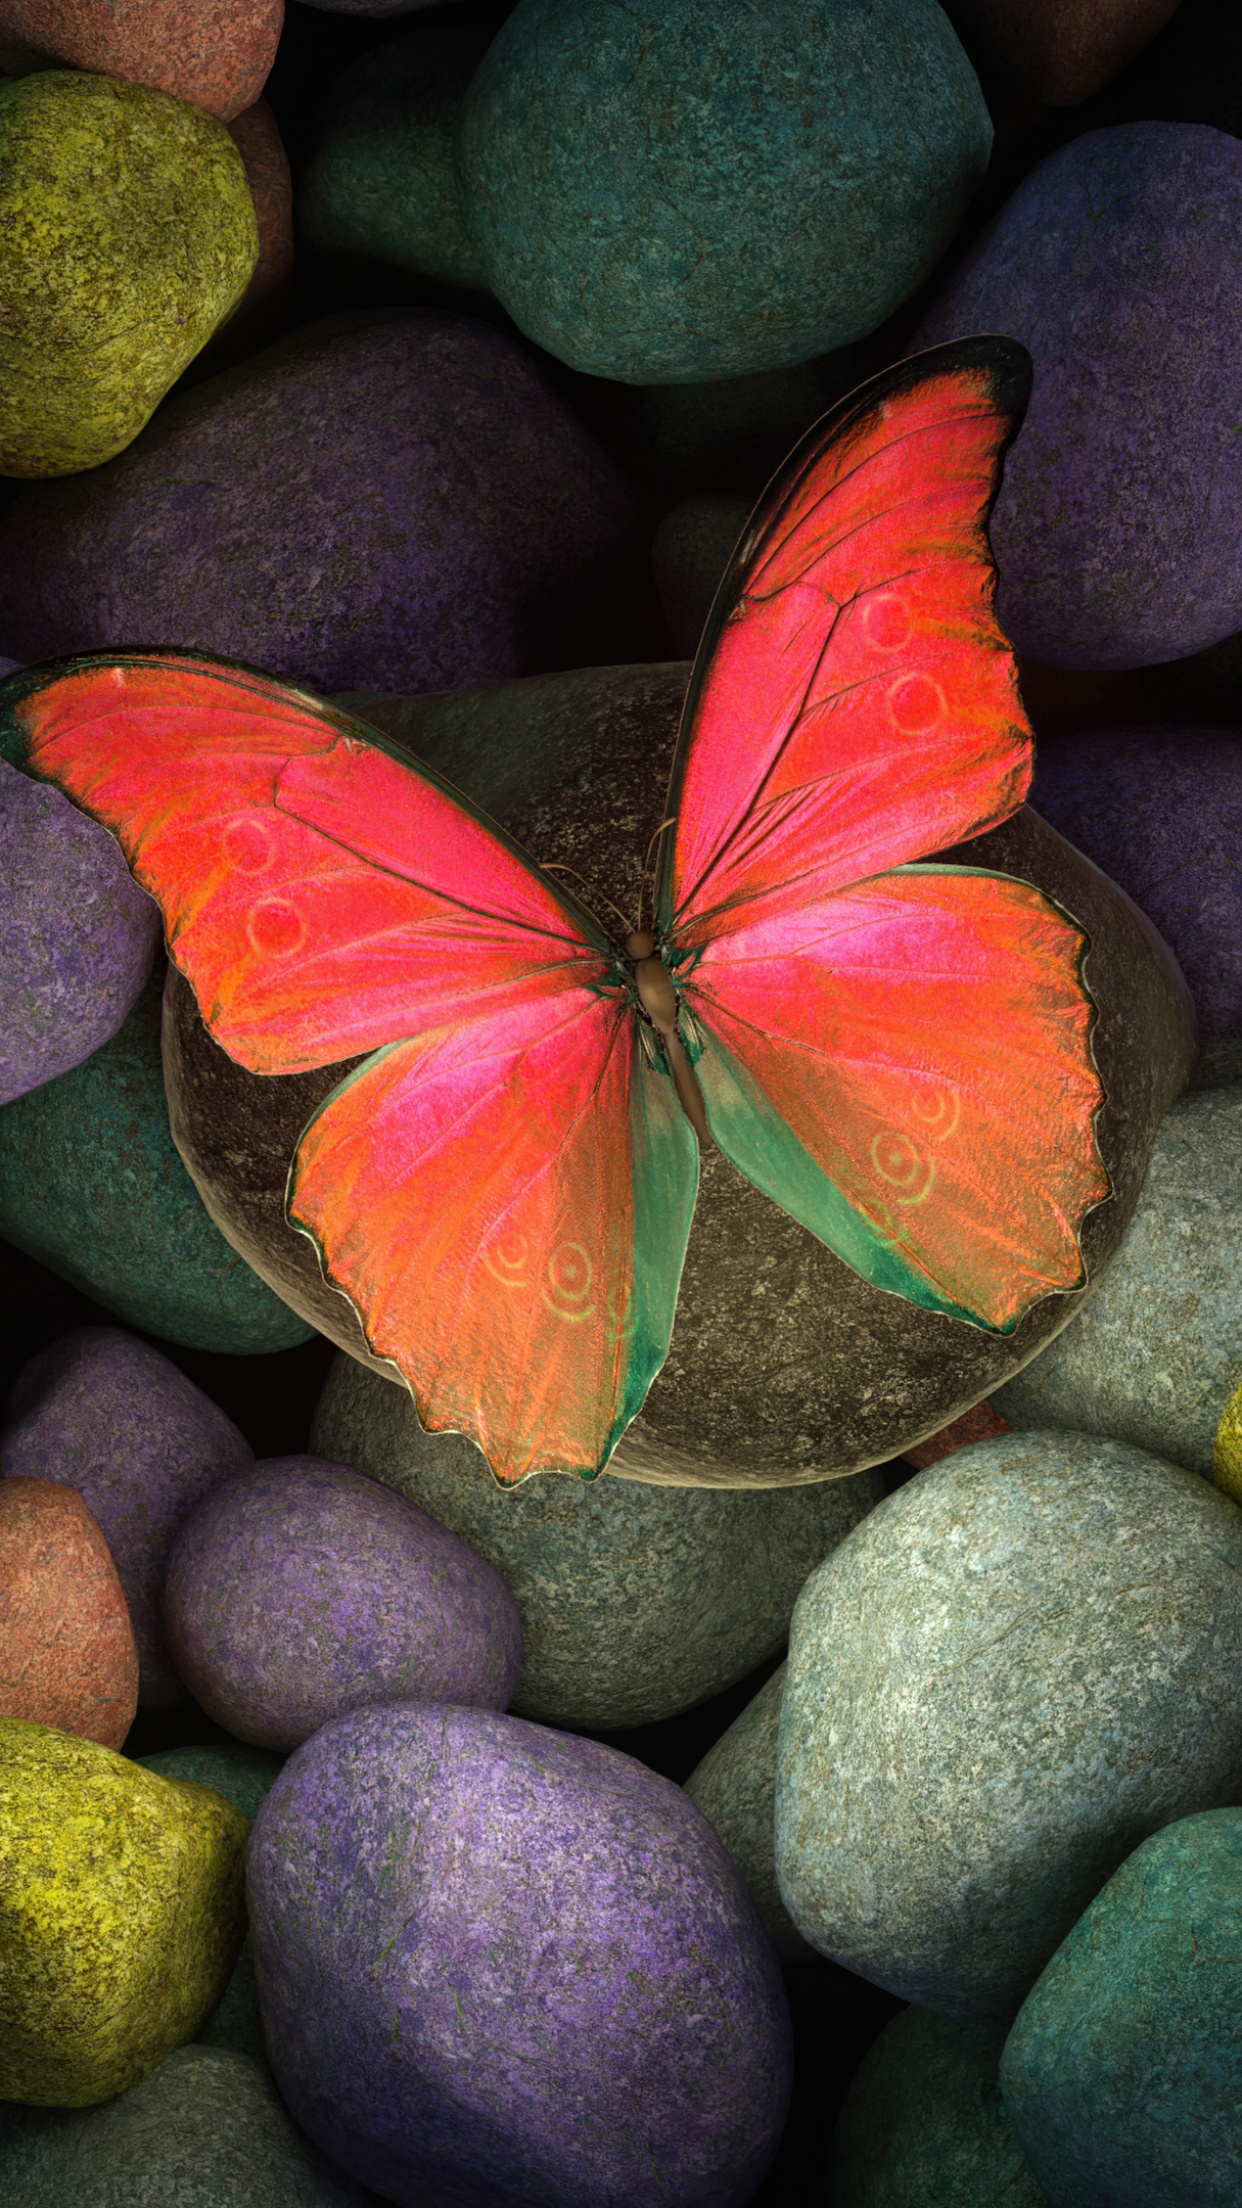 Butterfly 4K Wallpaper, Stones, Colorful, Focus, Pebbles, Photography